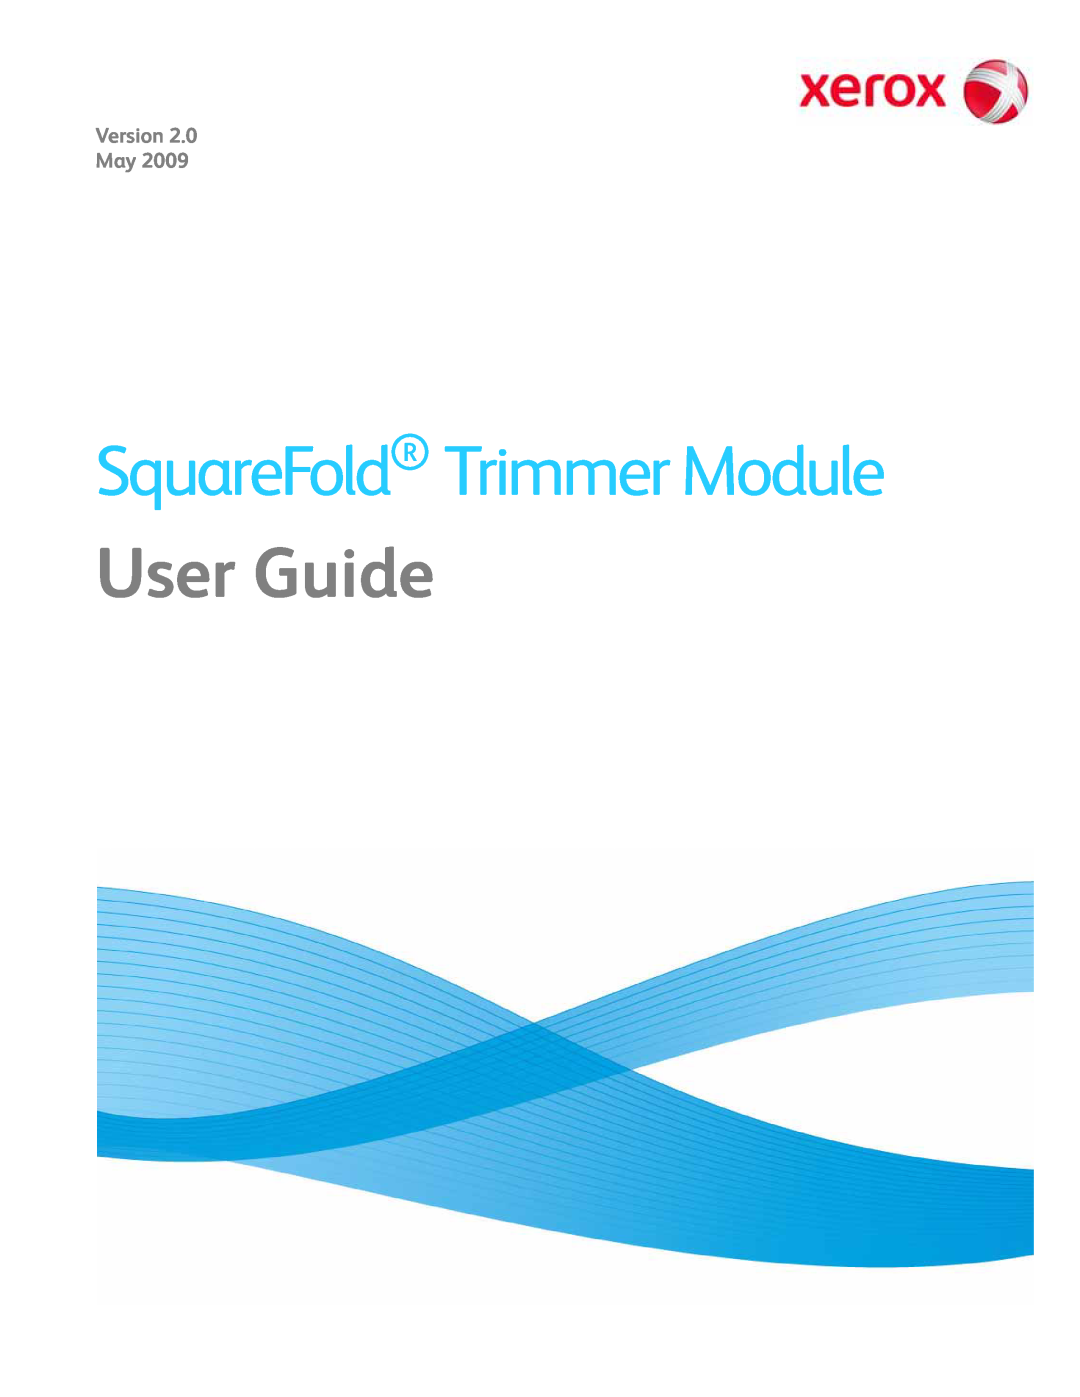 Xerox manual SquareFold Trimmer Module, User Guide, Version May 